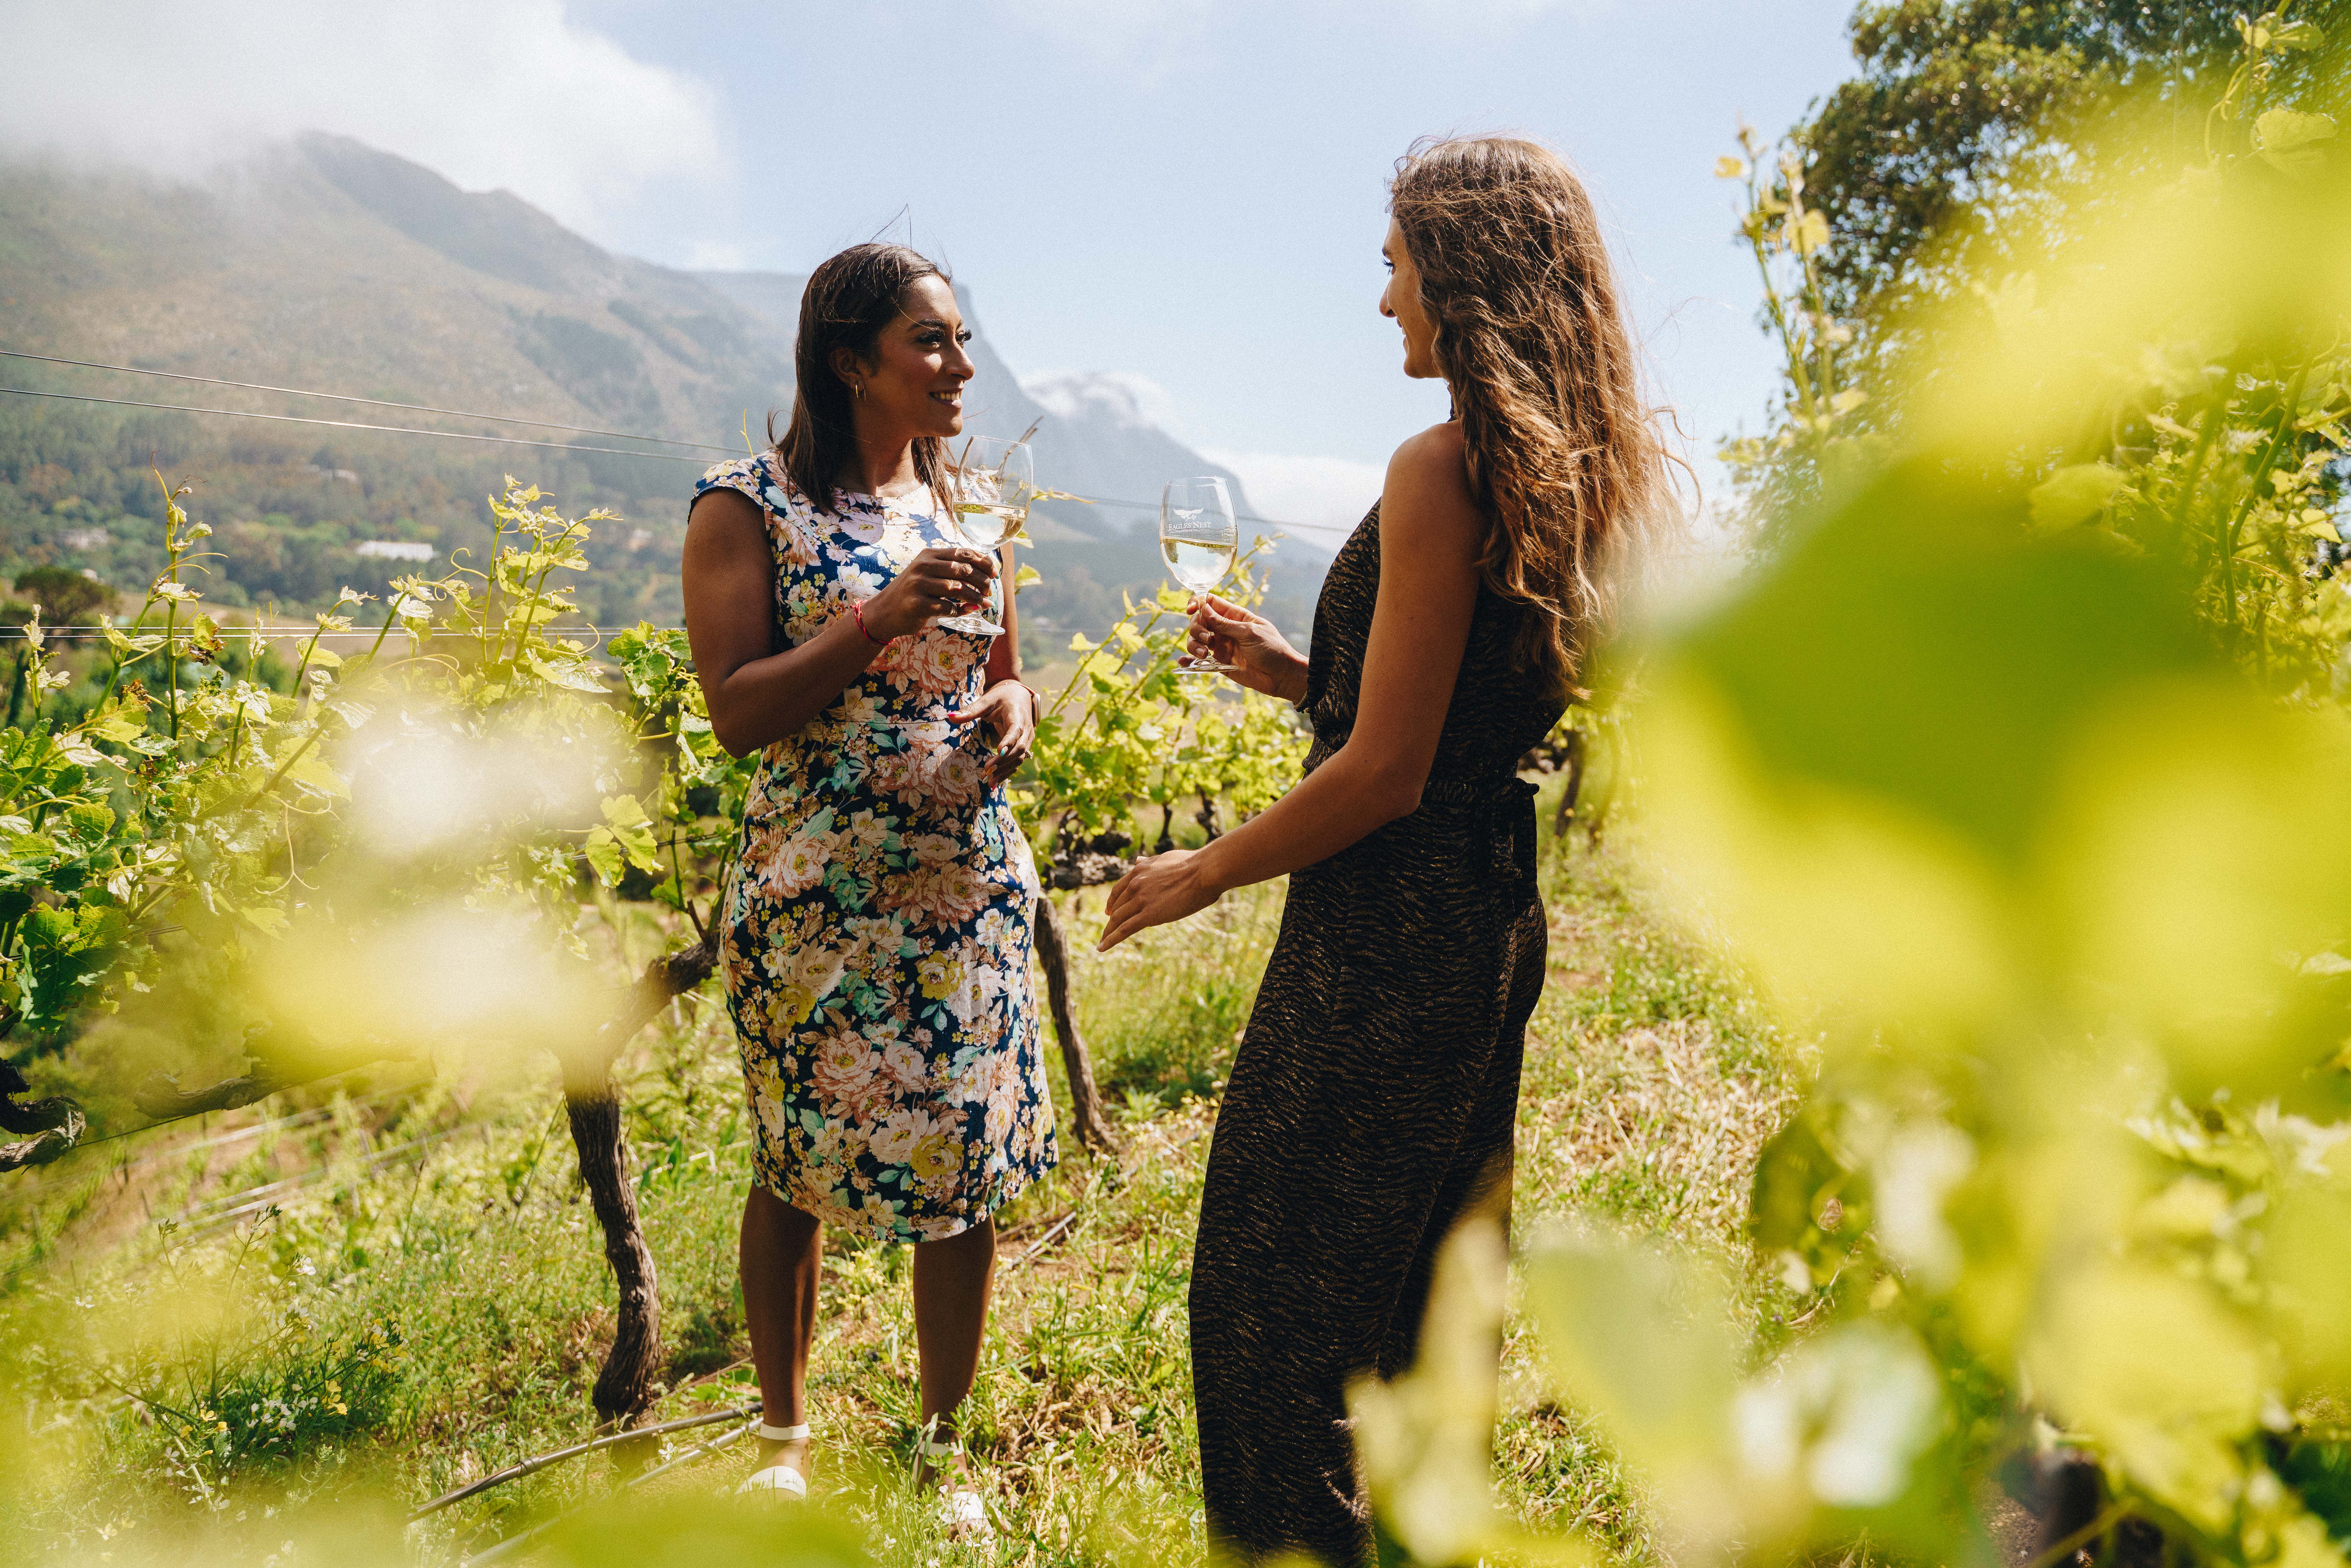 How Cape Town and the Western Cape celebrates the wine harvest